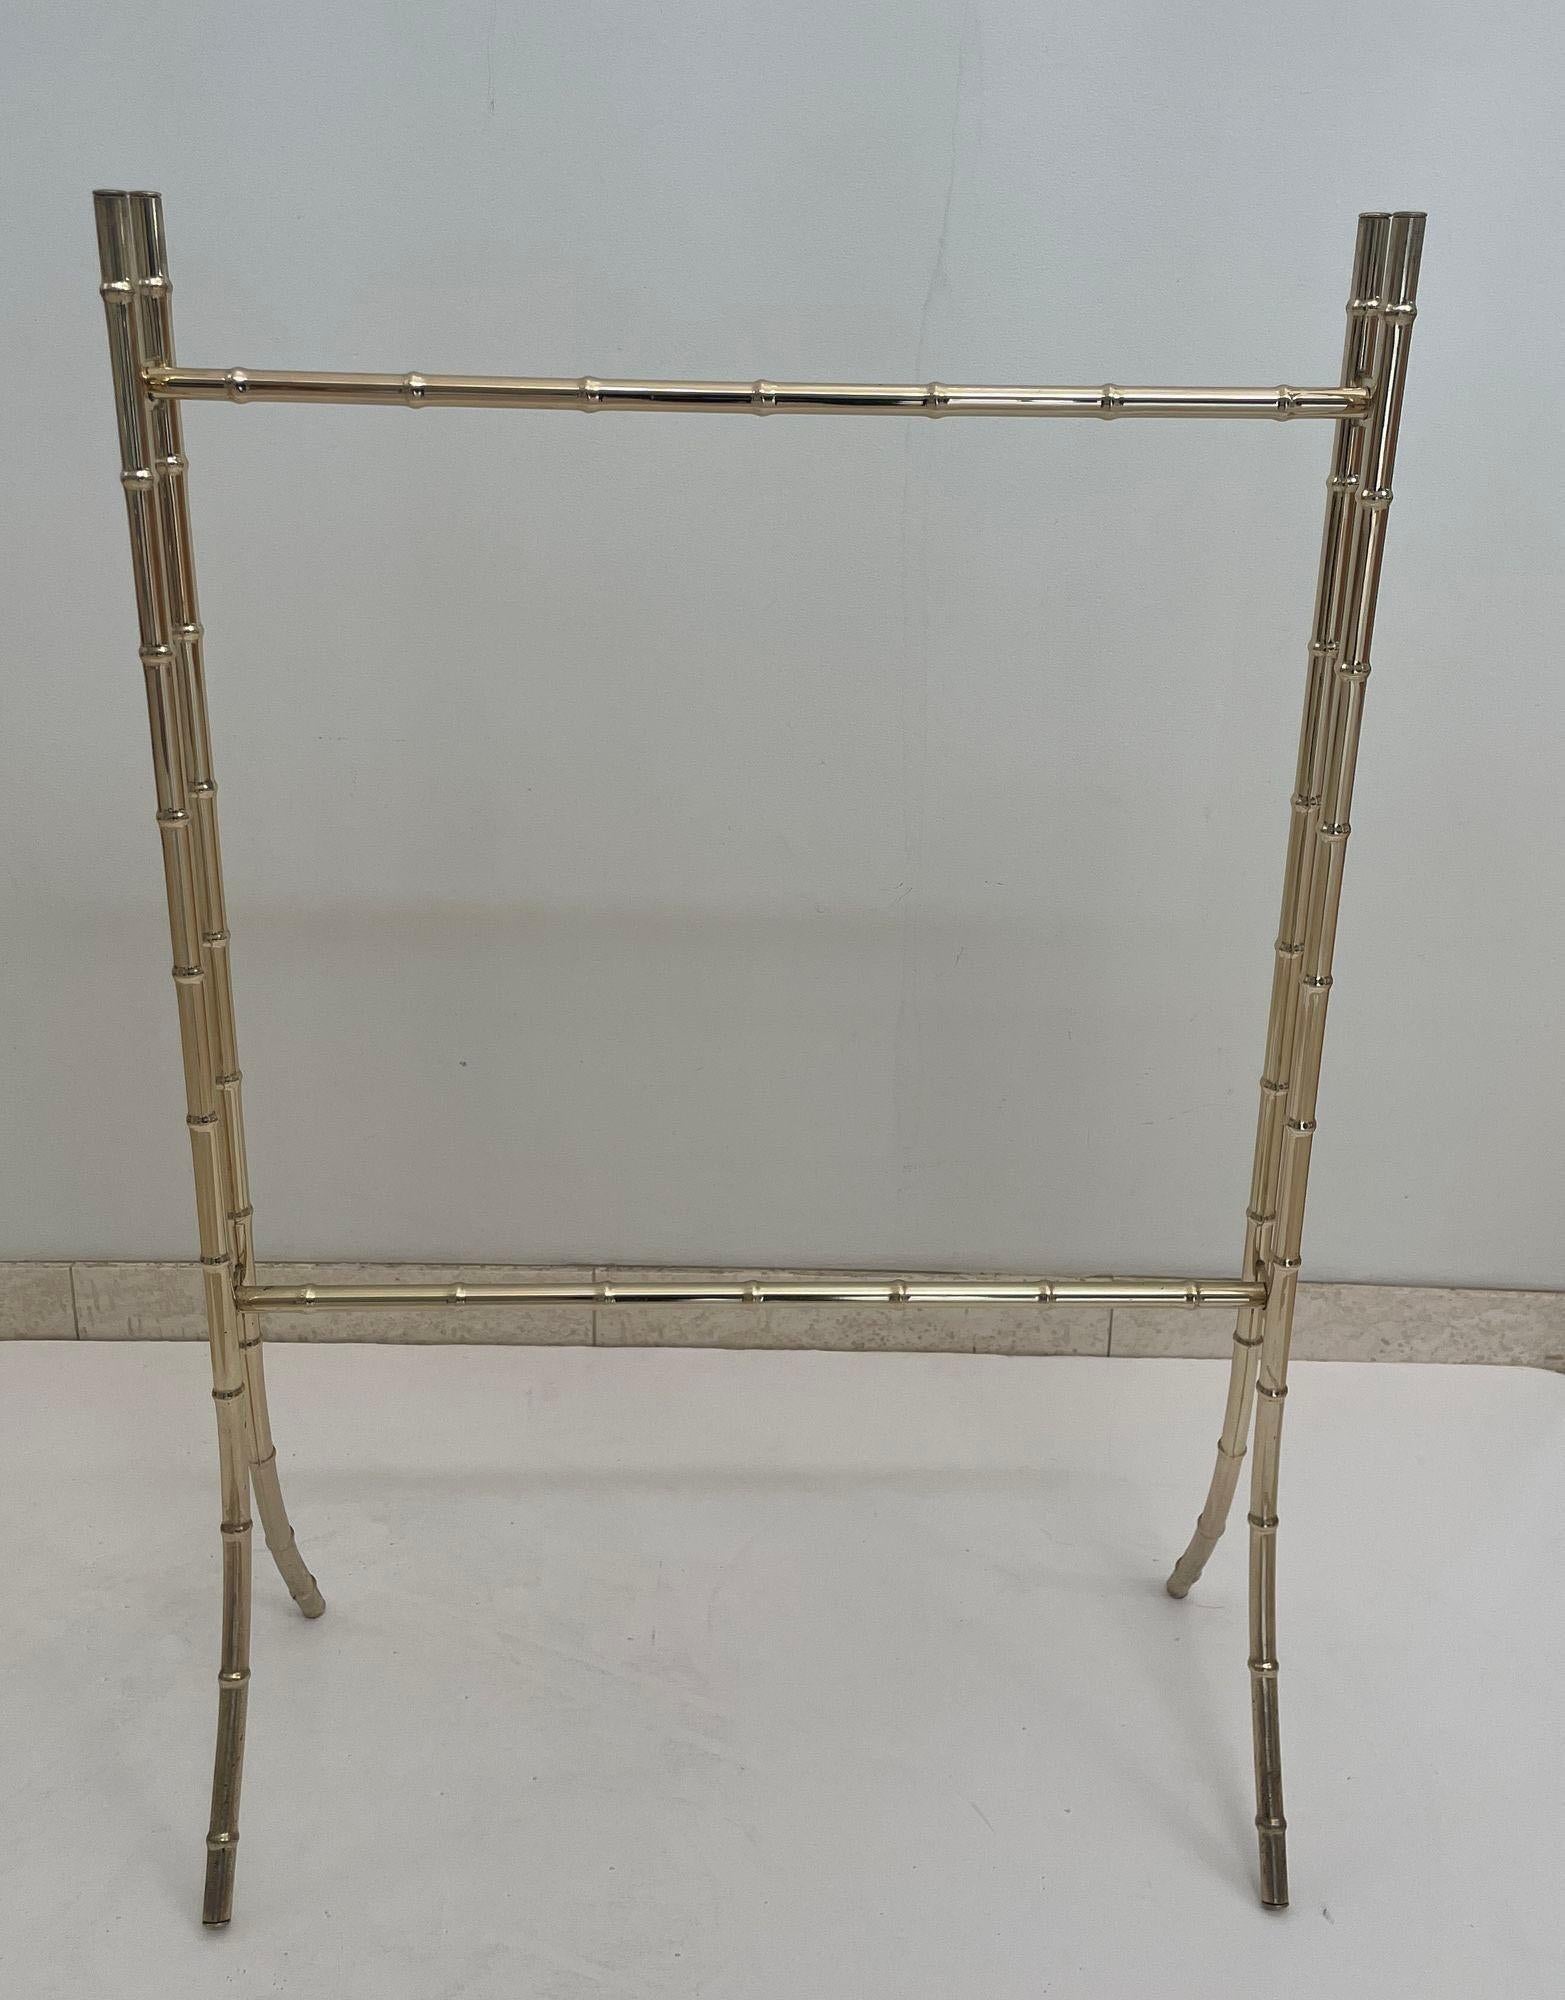 Hollywood Regency Faux Bamboo Gilt Metal Towel or Blanket Stand 1960s.
Elegant and stylish Hollywood Regency faux bamboo brass gold color metal stand multifunctional towel or quilt or blanket rack.
Dimensions: 25ʺW × 12ʺD × 38ʺH.
Mid Century Modern